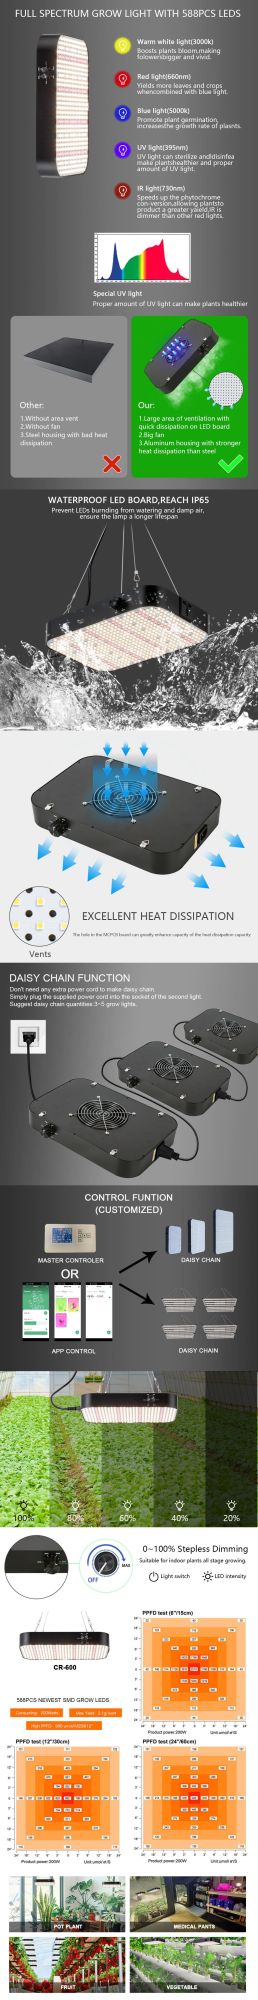 Watts Full Spectrum LED Grow Lighting with APP Control Daisy Chain Dimmable Grow Lights FCC Listed Licensed Grower′ S Choice